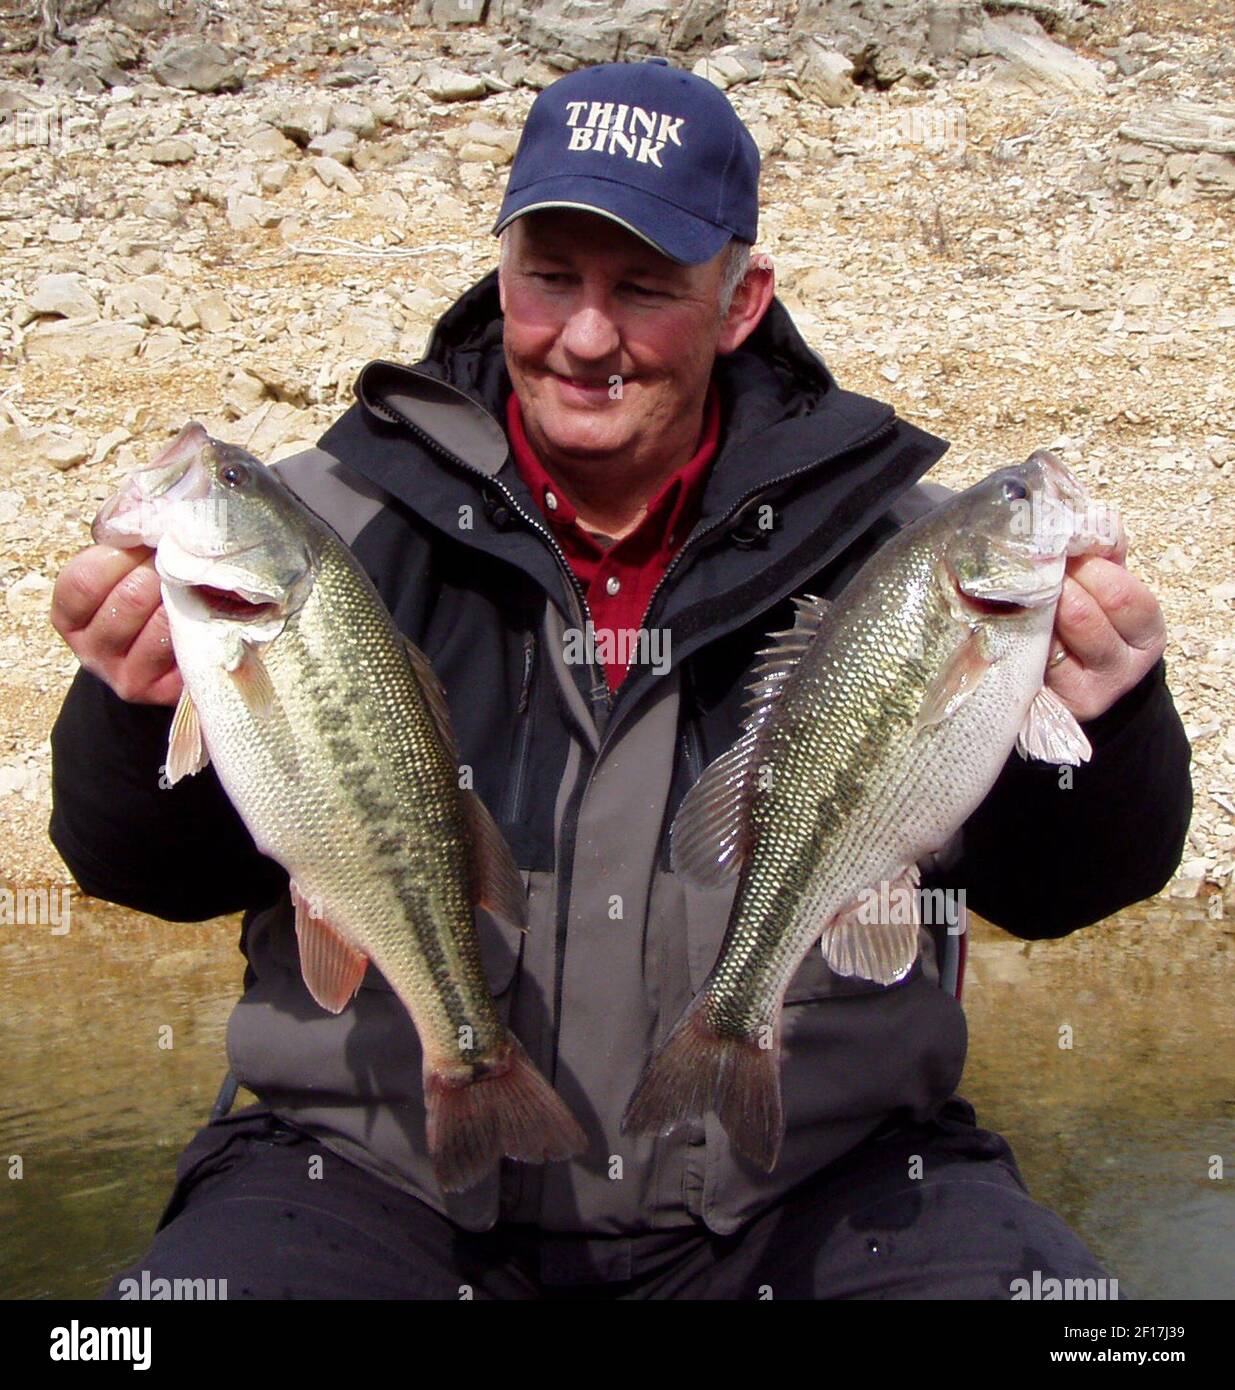 Darrel Binkley knows that winter can promote good bass fishing